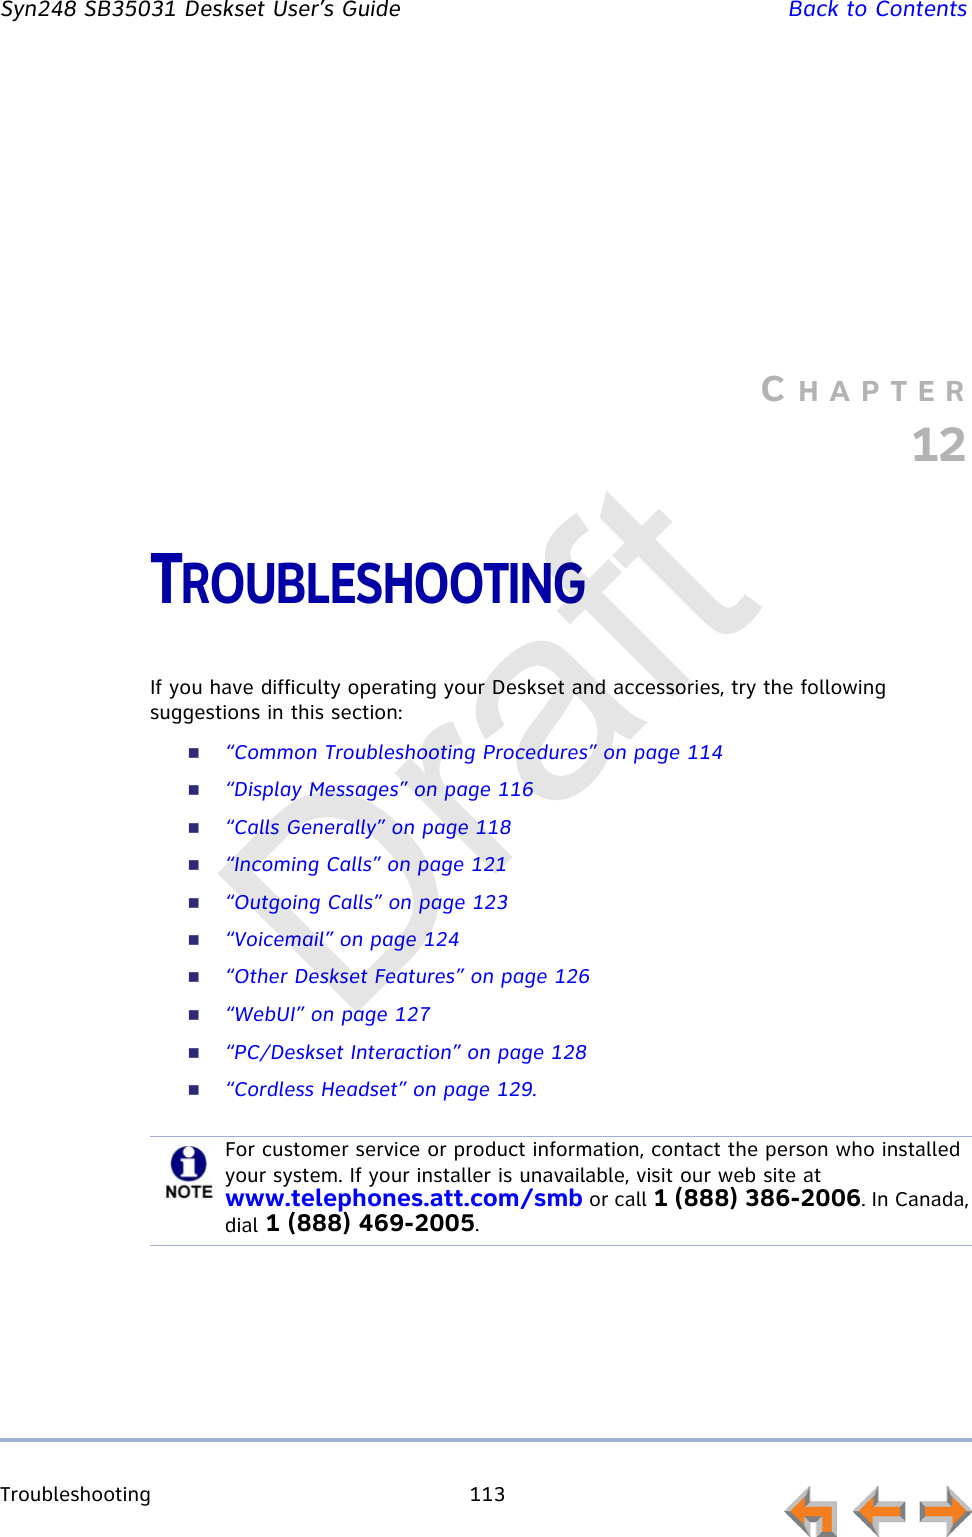 Troubleshooting 113         Syn248 SB35031 Deskset User’s Guide Back to ContentsCHAPTER12TROUBLESHOOTINGIf you have difficulty operating your Deskset and accessories, try the following suggestions in this section:“Common Troubleshooting Procedures” on page 114“Display Messages” on page 116“Calls Generally” on page 118“Incoming Calls” on page 121“Outgoing Calls” on page 123“Voicemail” on page 124“Other Deskset Features” on page 126“WebUI” on page 127“PC/Deskset Interaction” on page 128“Cordless Headset” on page 129.For customer service or product information, contact the person who installed your system. If your installer is unavailable, visit our web site at www.telephones.att.com/smb or call 1 (888) 386-2006. In Canada, dial 1 (888) 469-2005.Draft